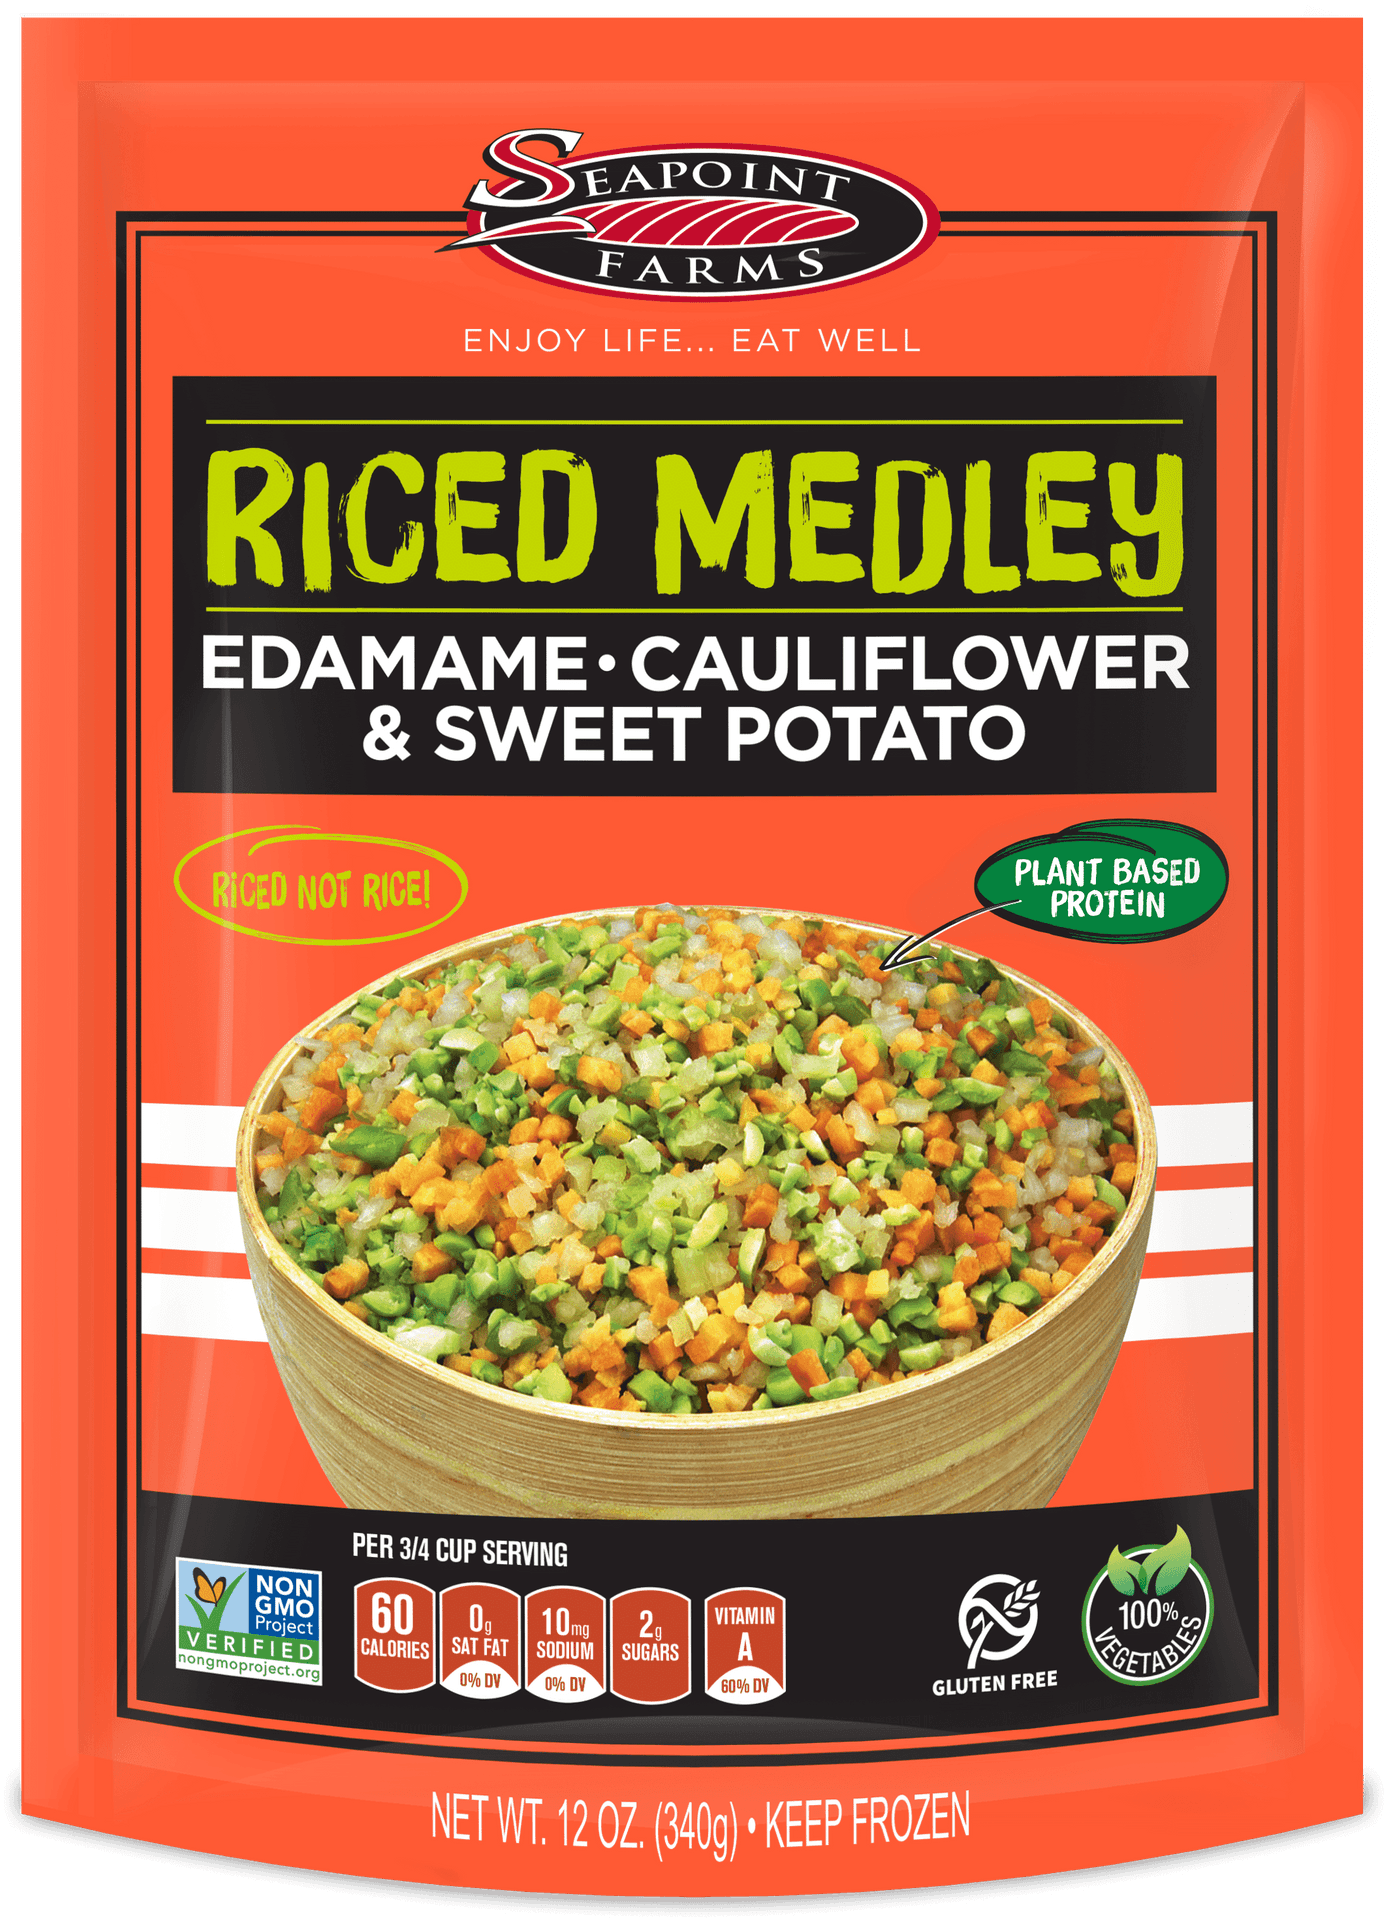 Seapoint Farms Riced Medley Edamame Cauliflower Sweet Potato Package PNG